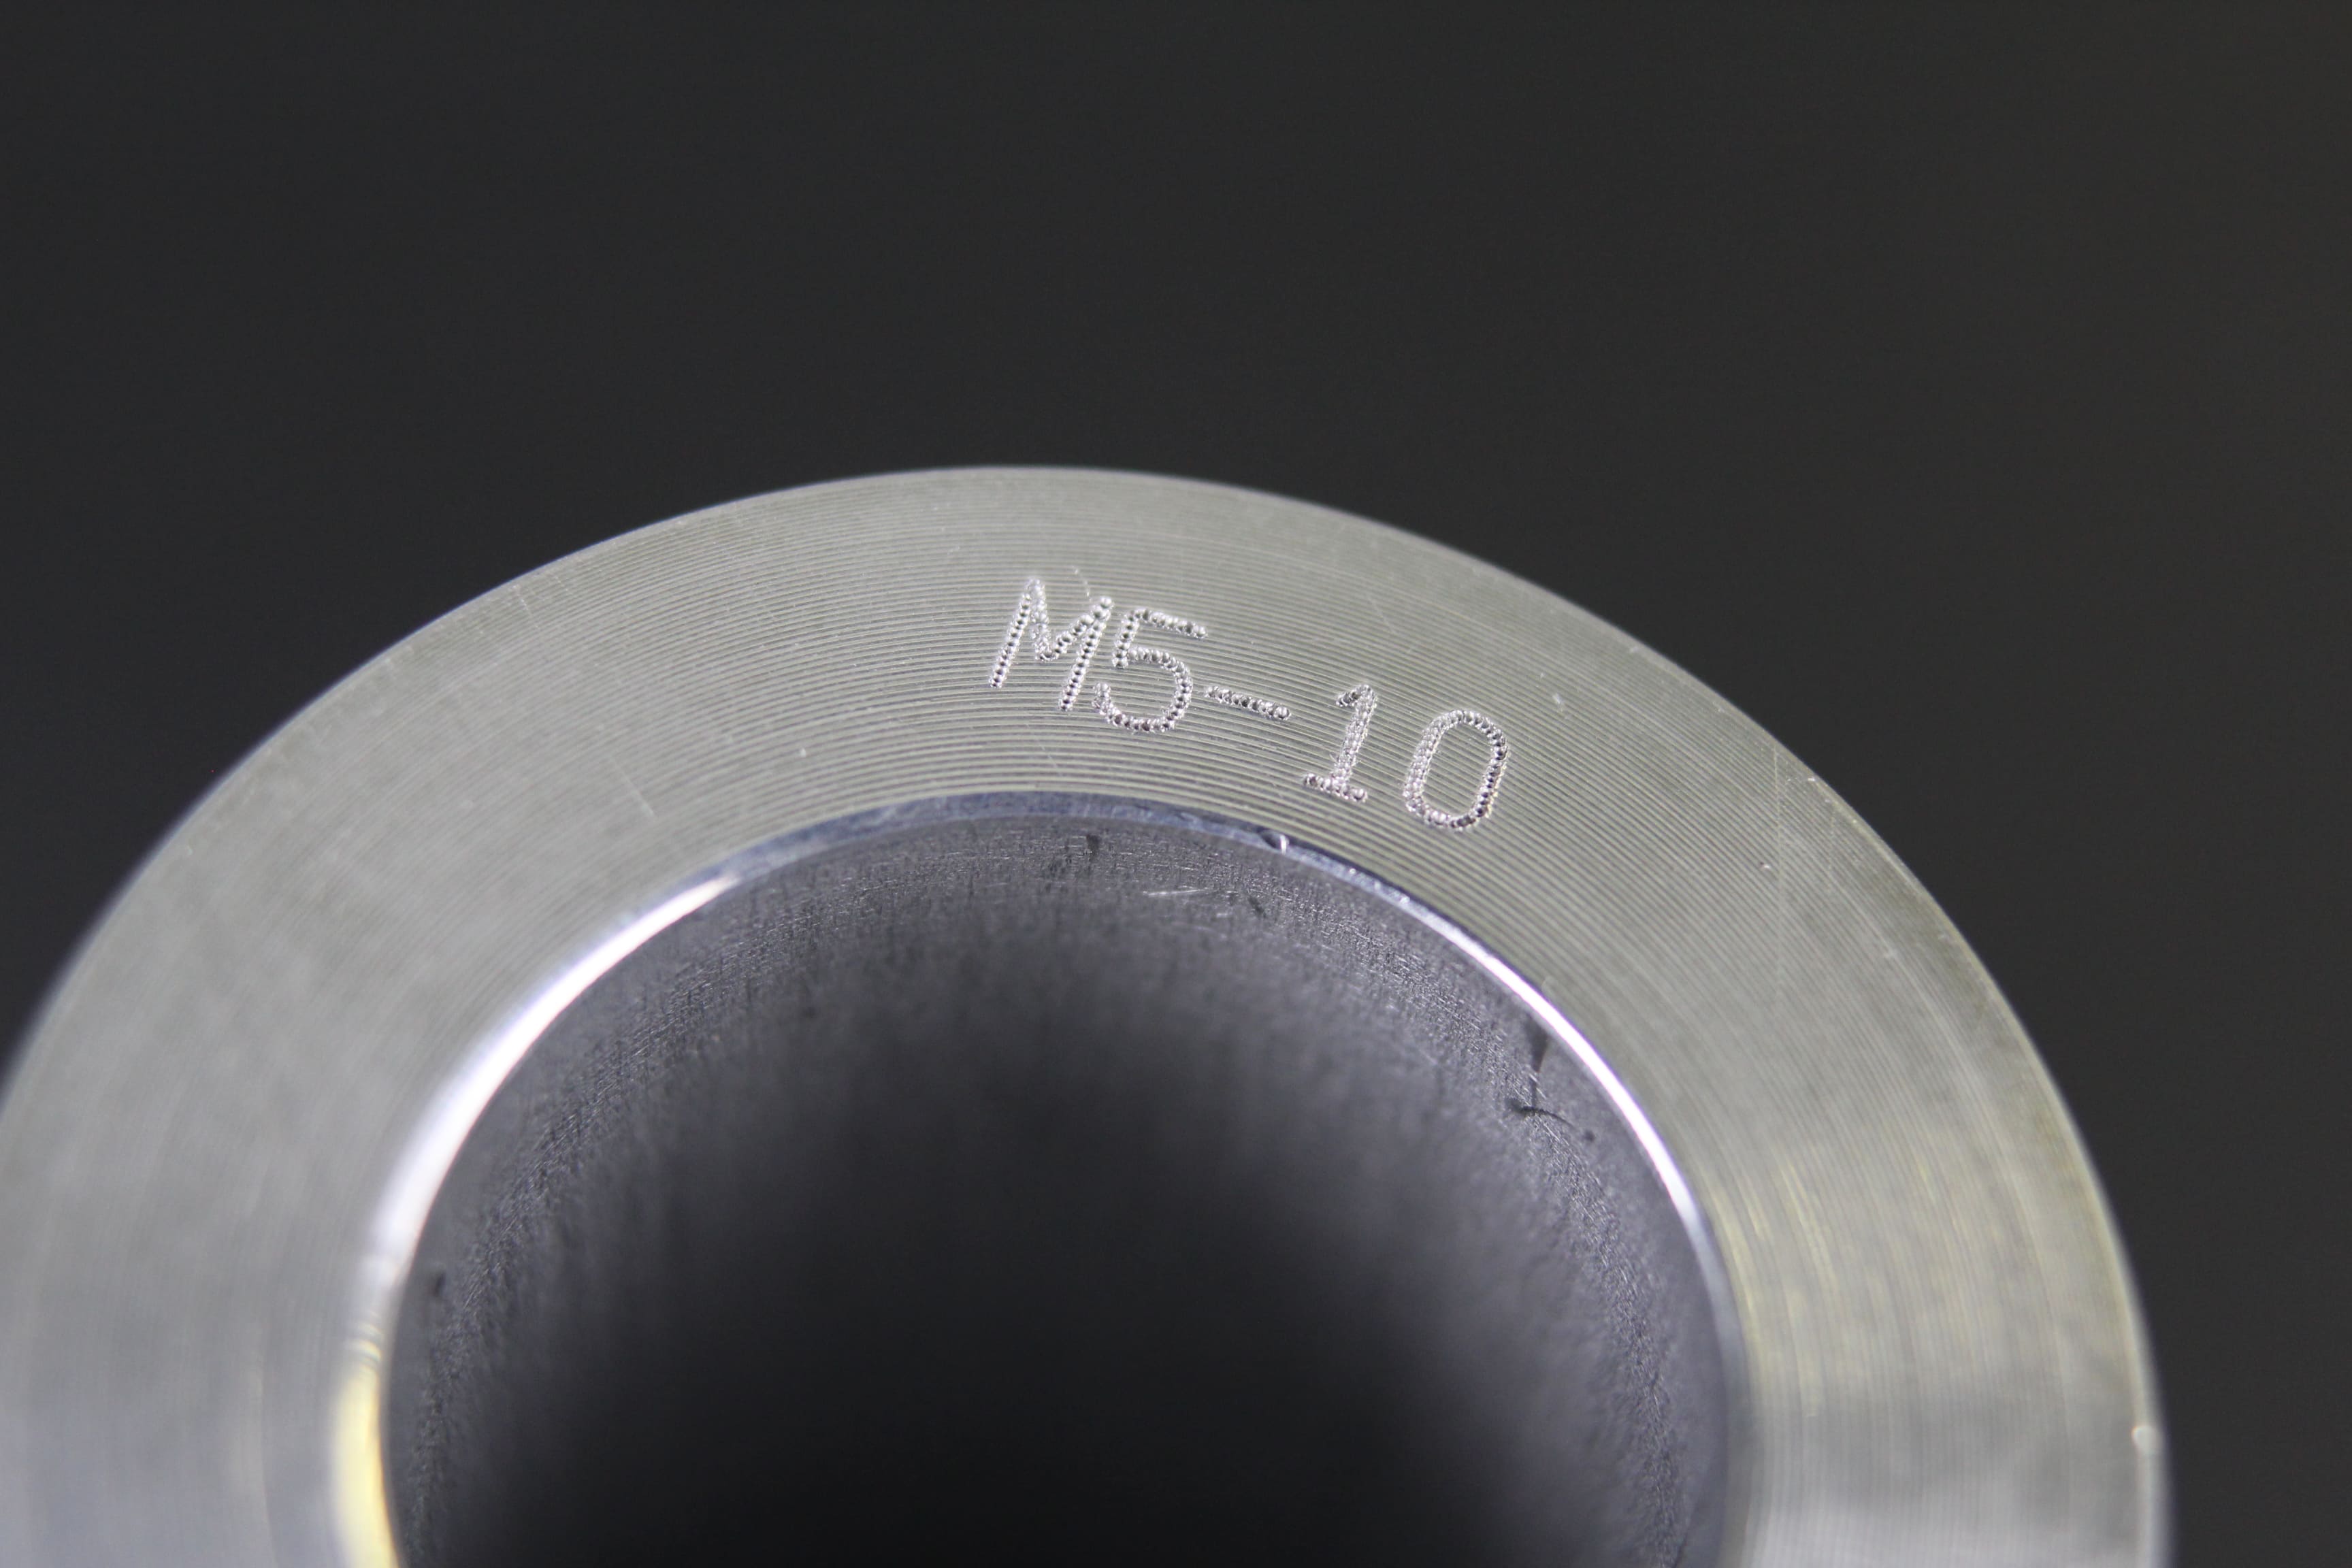 Image of an end bar engraved with text and numbers reading 'M5-10'.